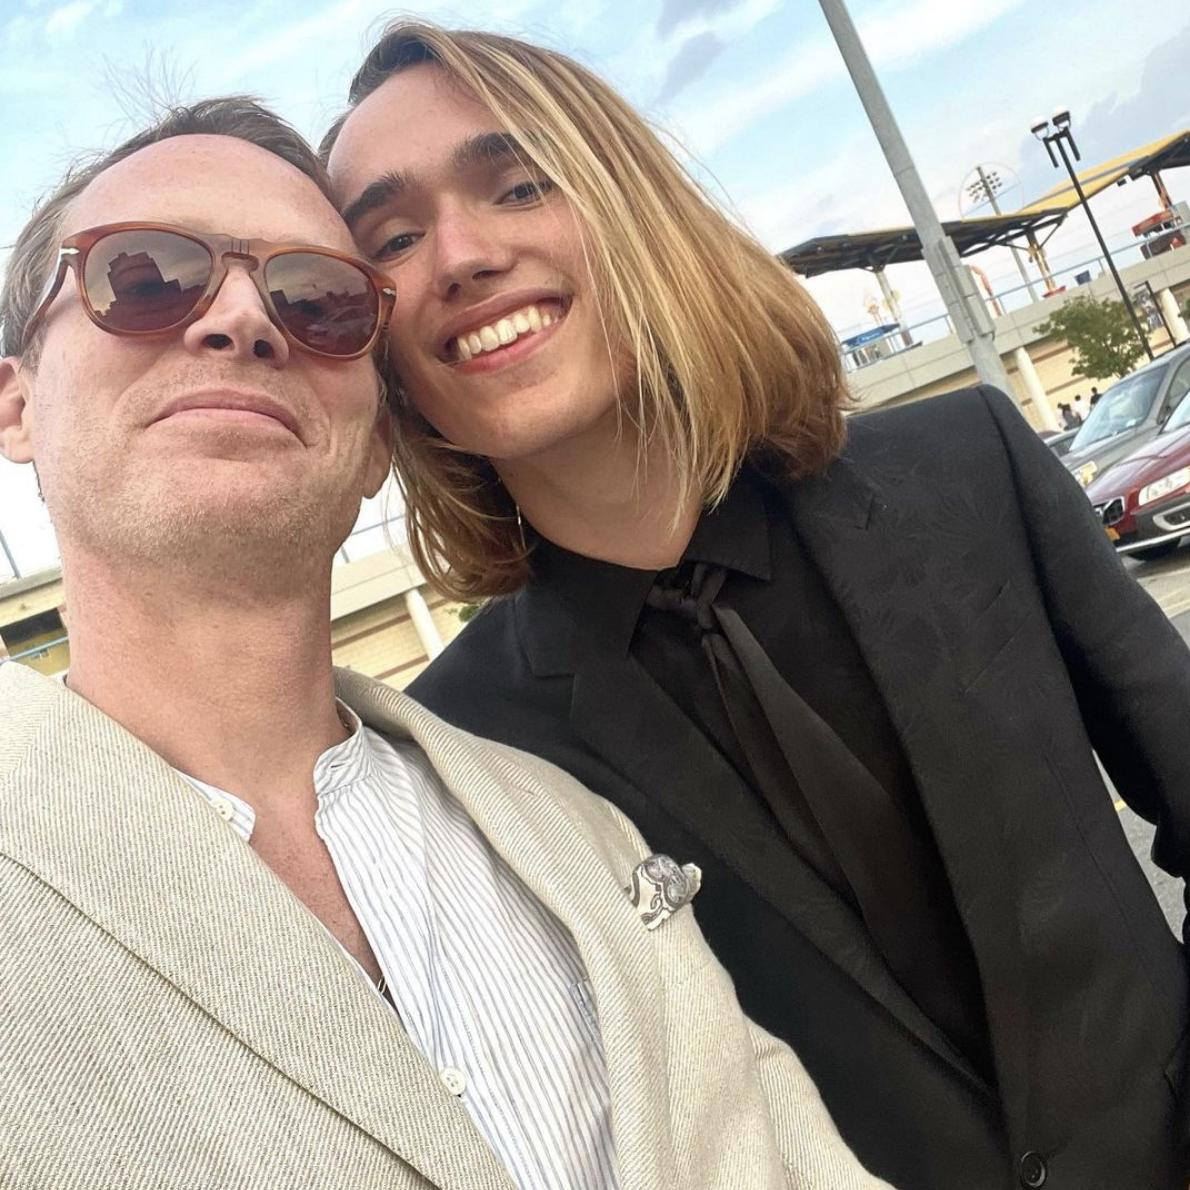 <p>Paul Bettany posted this selfie with son Stellan -- who was born in 2003 and is the spitting image of mom Jennifer Connelly -- on his high school graduation day in June 2021. "So that happened. The short version is that Stellan graduated and I cried like a baby," Paul captioned the Instagram <a href="https://www.instagram.com/p/CP1u0W-sk5X/">snapshot</a>. Paul and Jennifer also share daughter Agnes, who was born in 2011.</p>